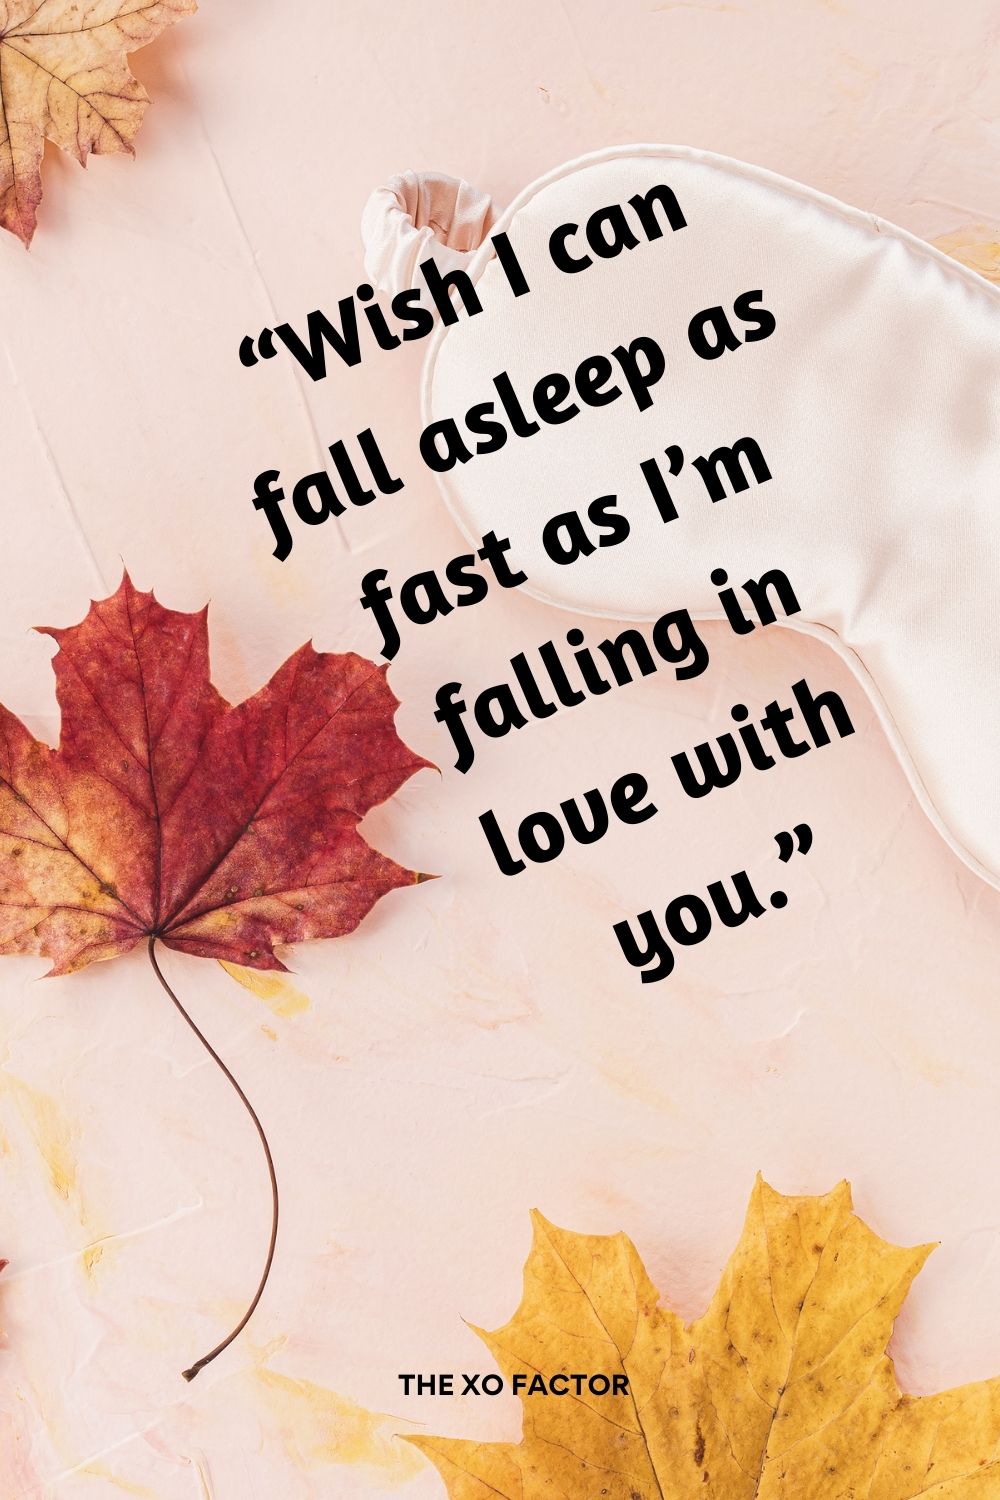 “Wish I can fall asleep as fast as I’m falling in love with you.”